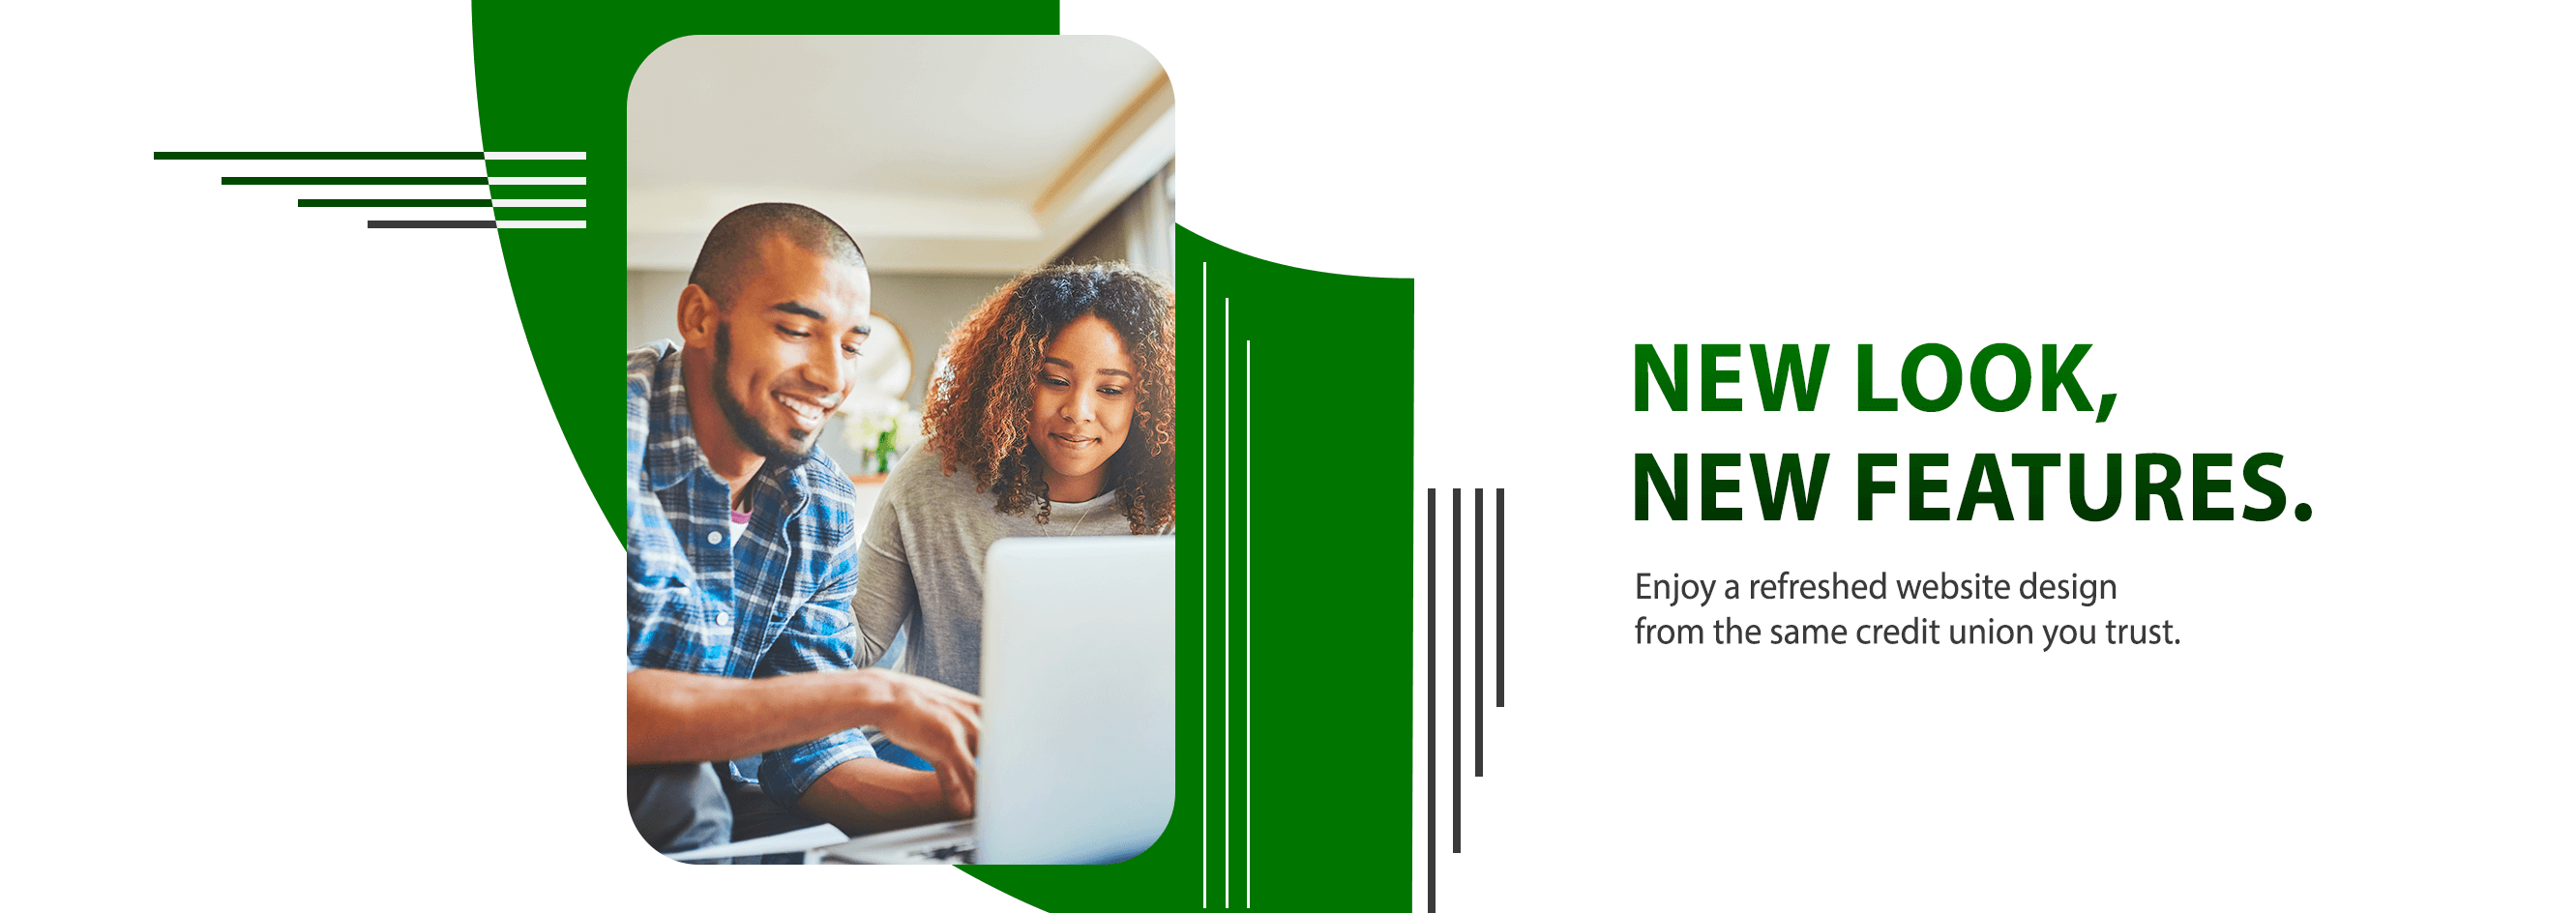 New look, new features. Enjoy a refreshed website redesign from the same credit union you trust.